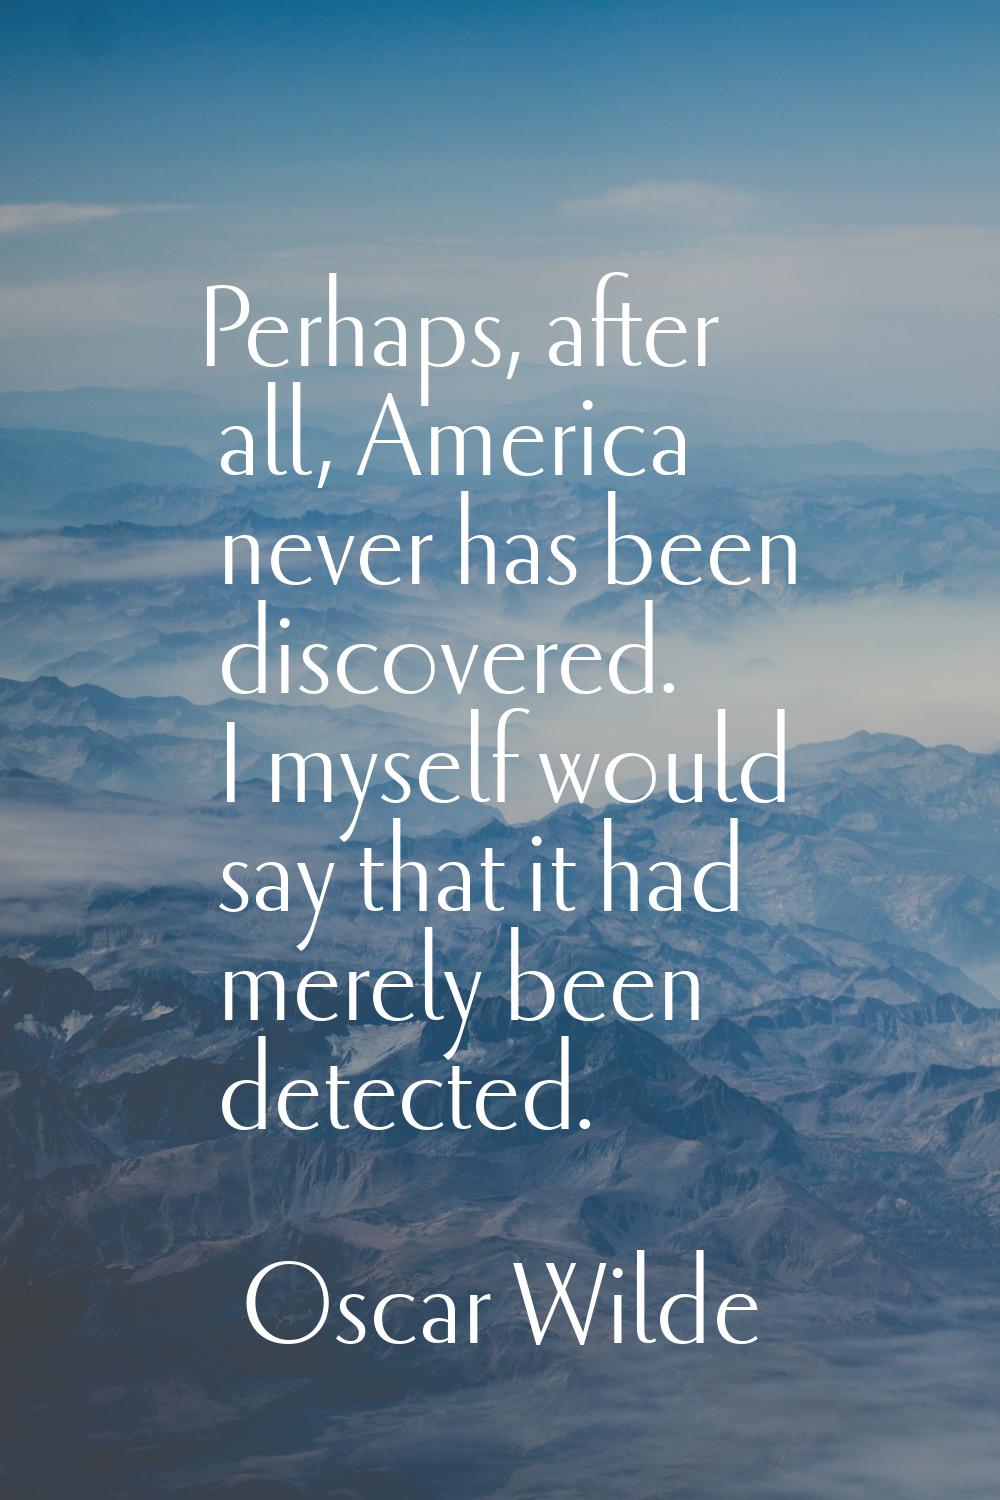 Perhaps, after all, America never has been discovered. I myself would say that it had merely been d